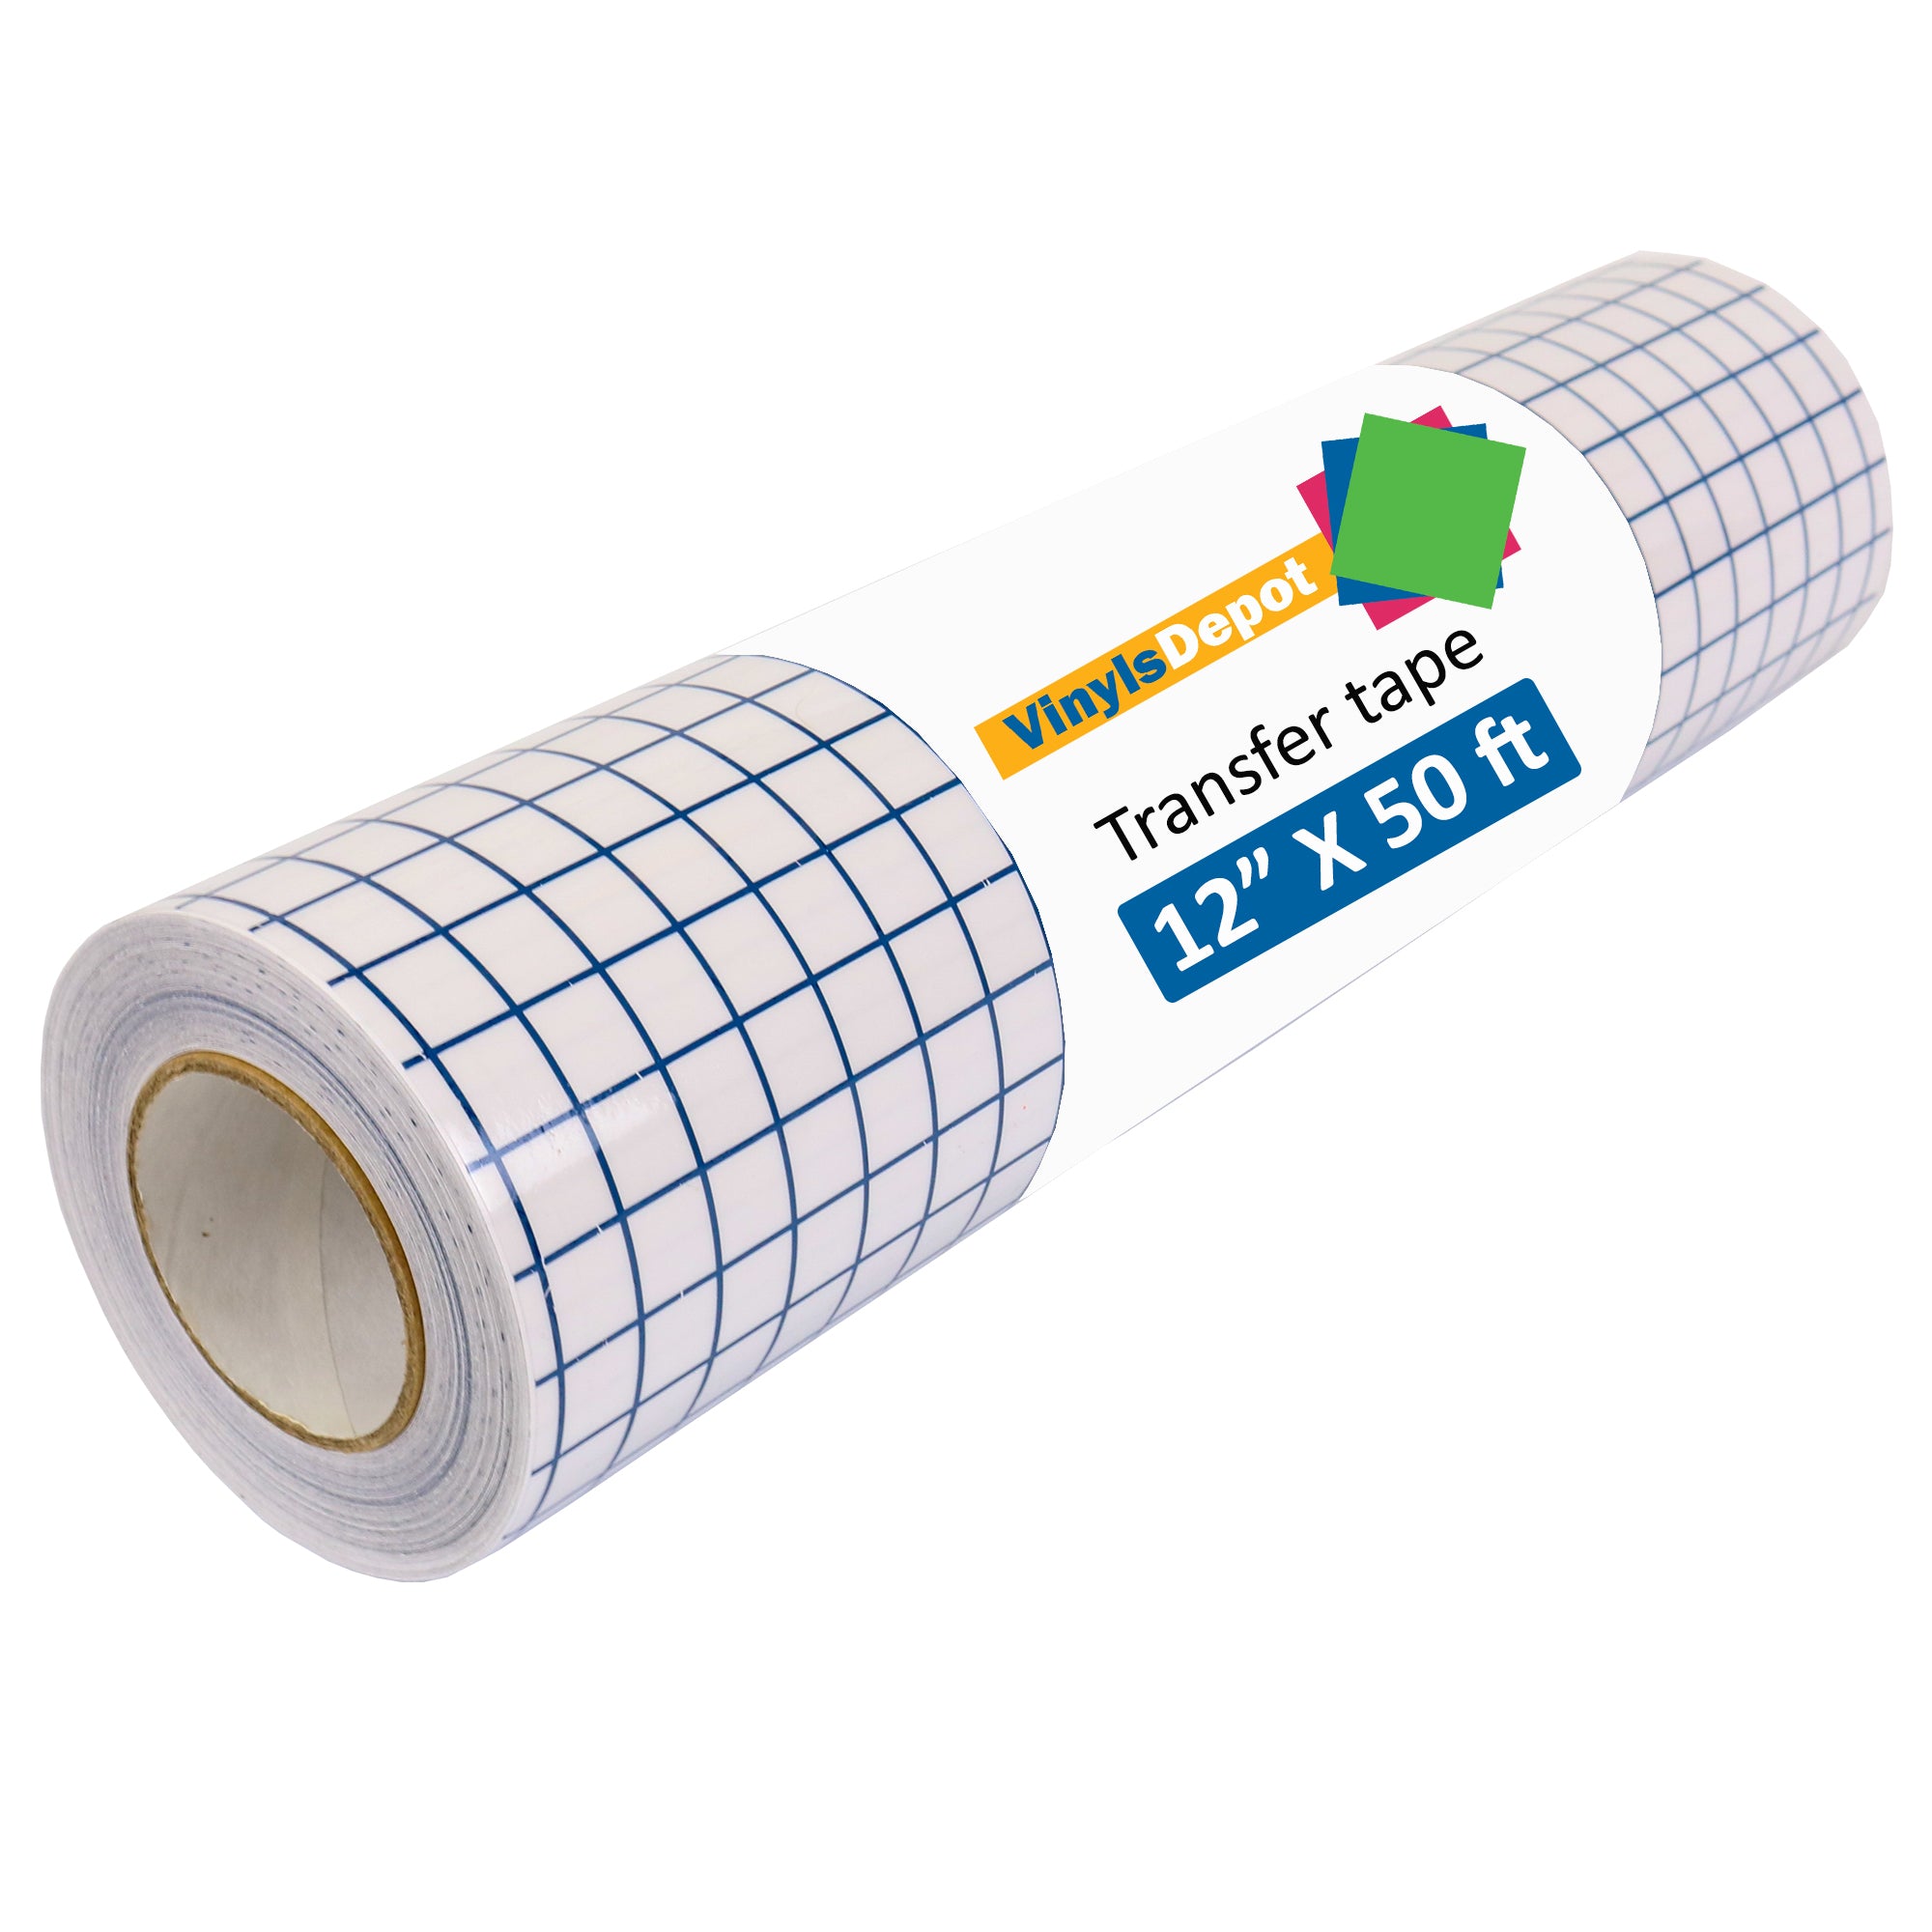 Grid-Lined Paper Transfer Tape 12x30' Roll (Blue Lines) 